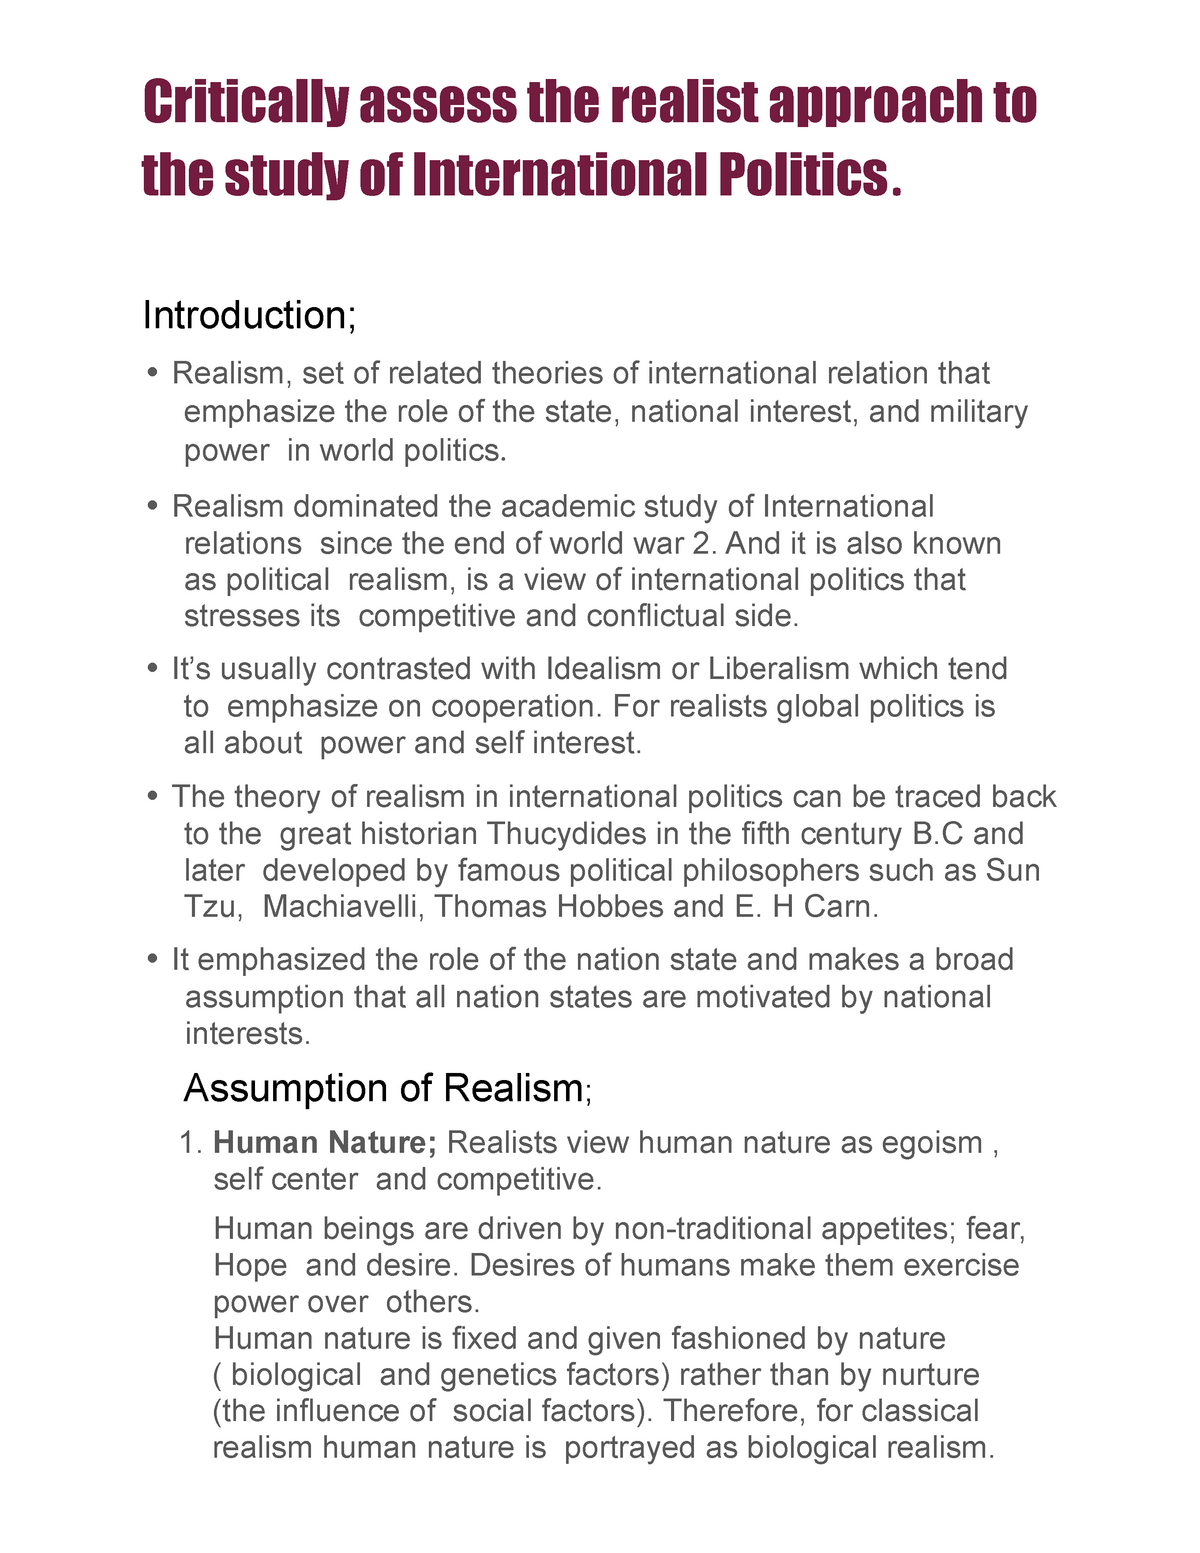 case study of realism in international relations